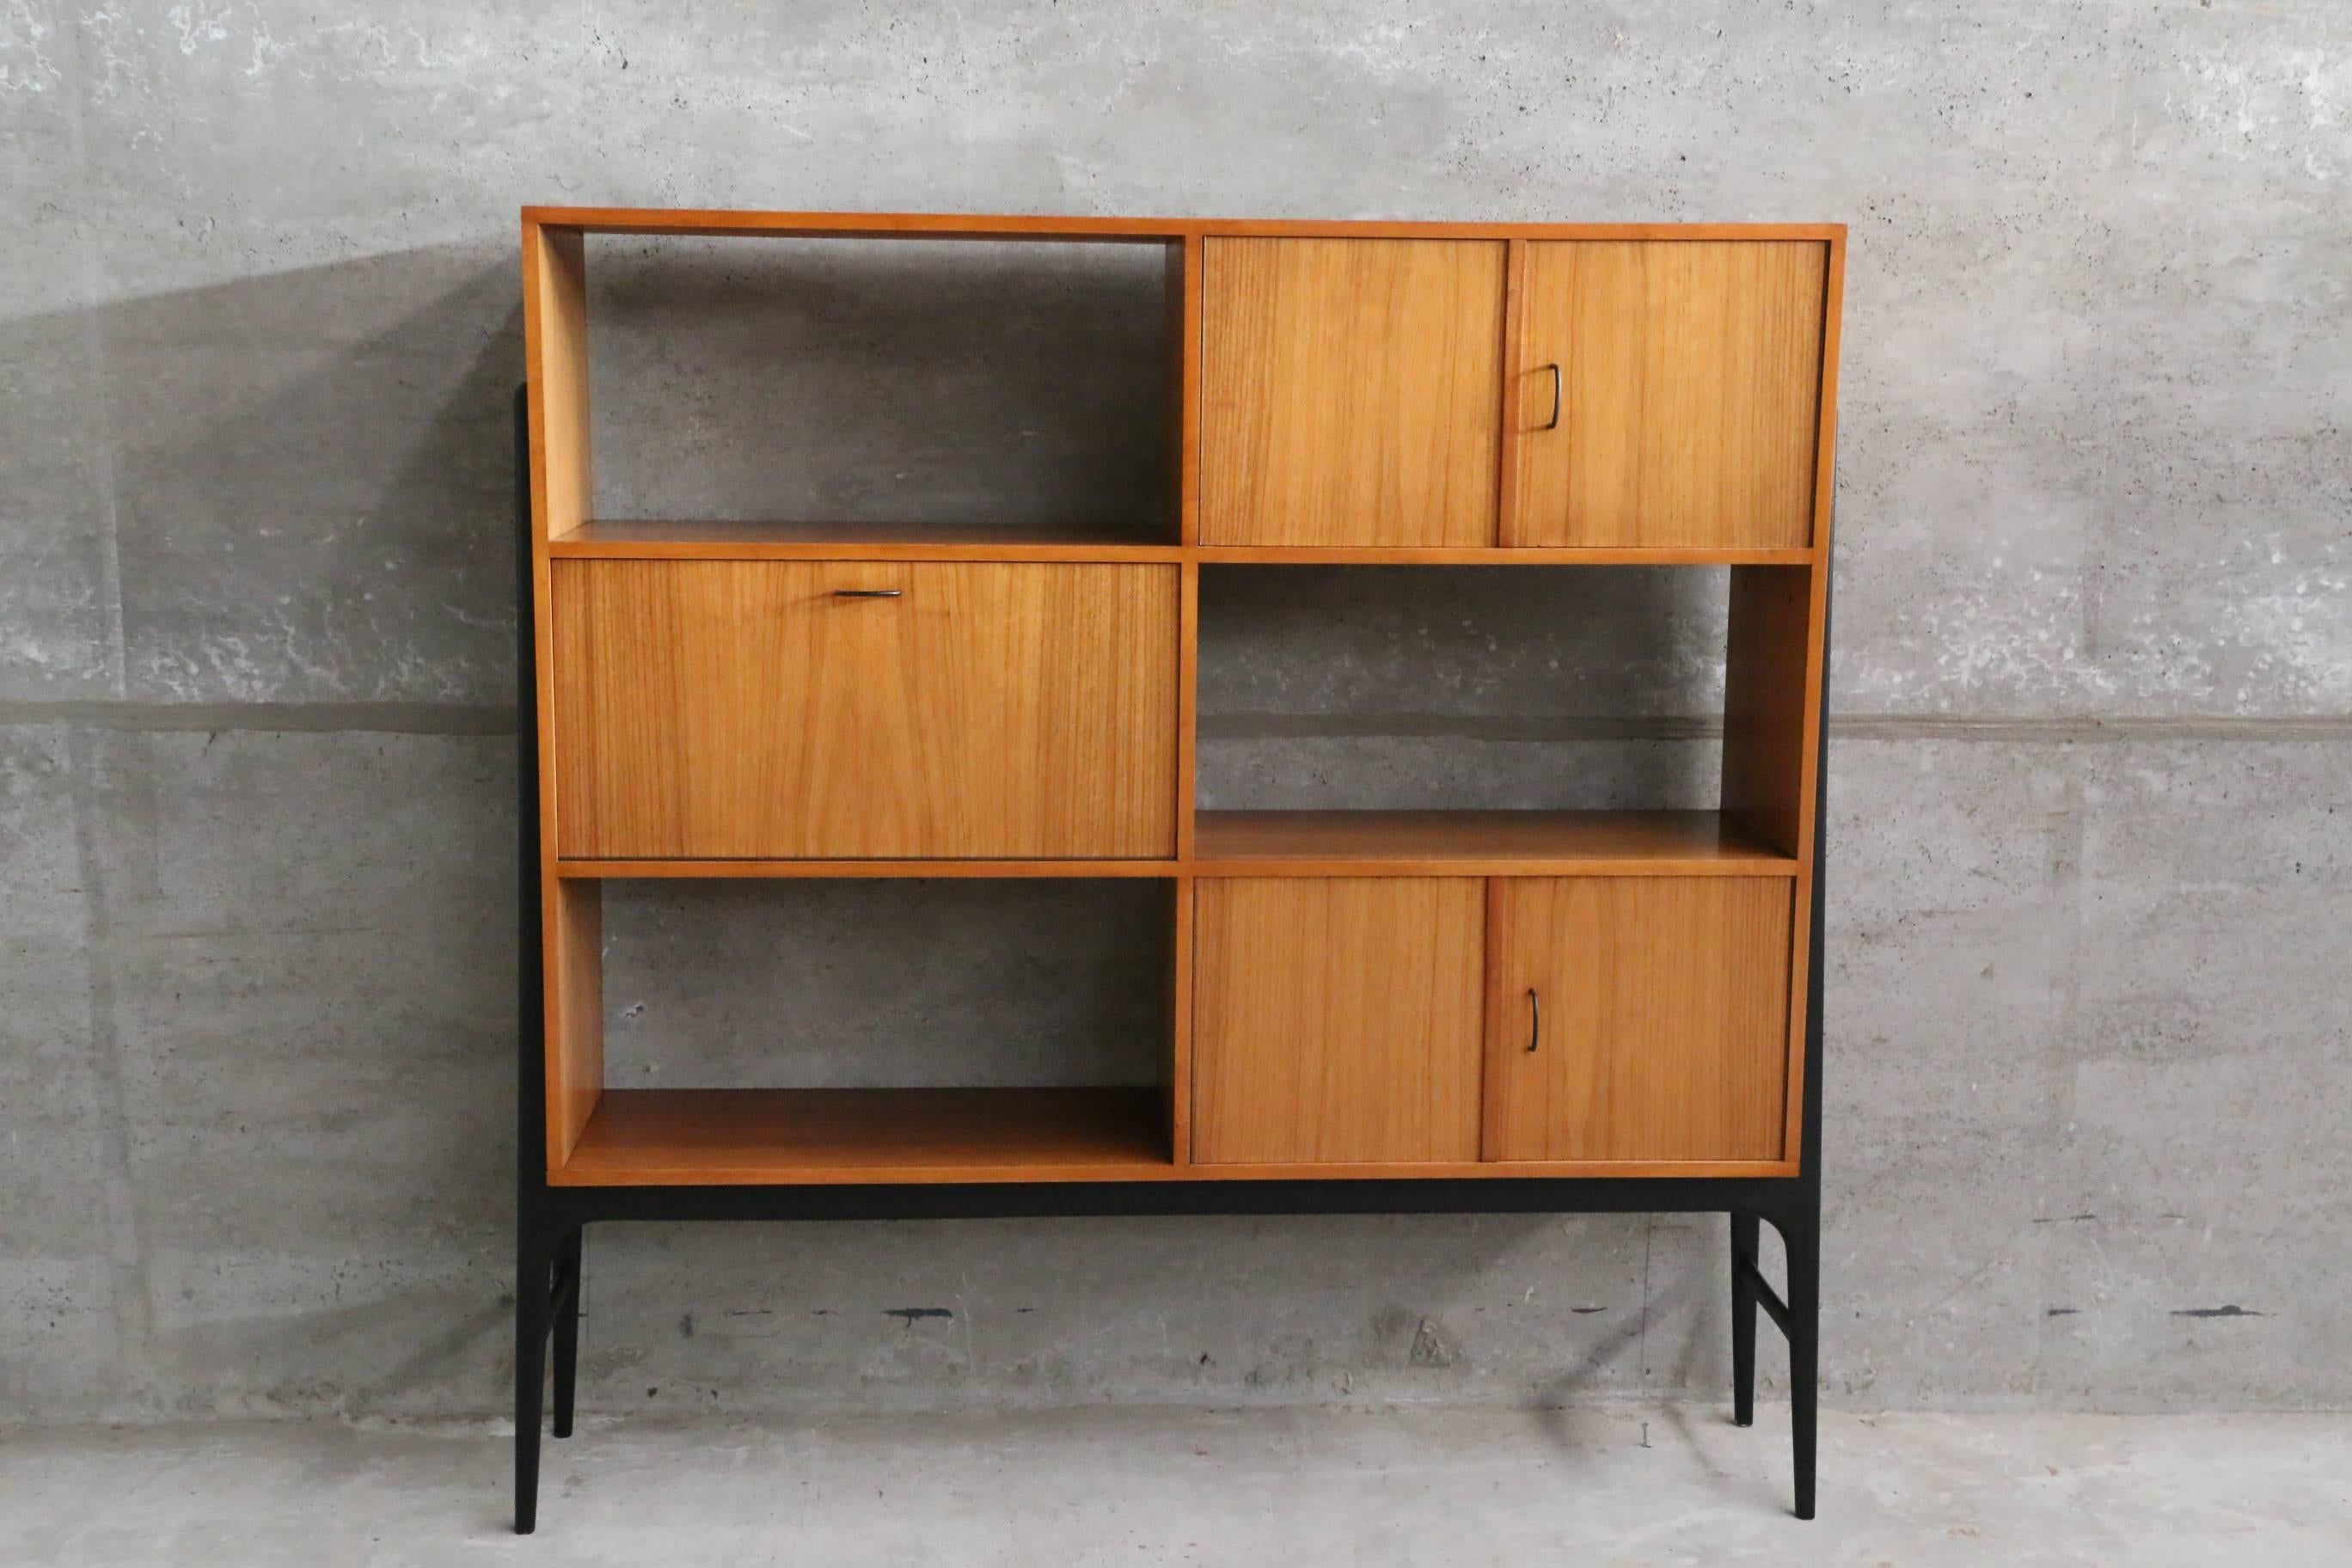 Rare Modernist Highboard by Belgian Architect and Designer Alfred Hendrickx 1